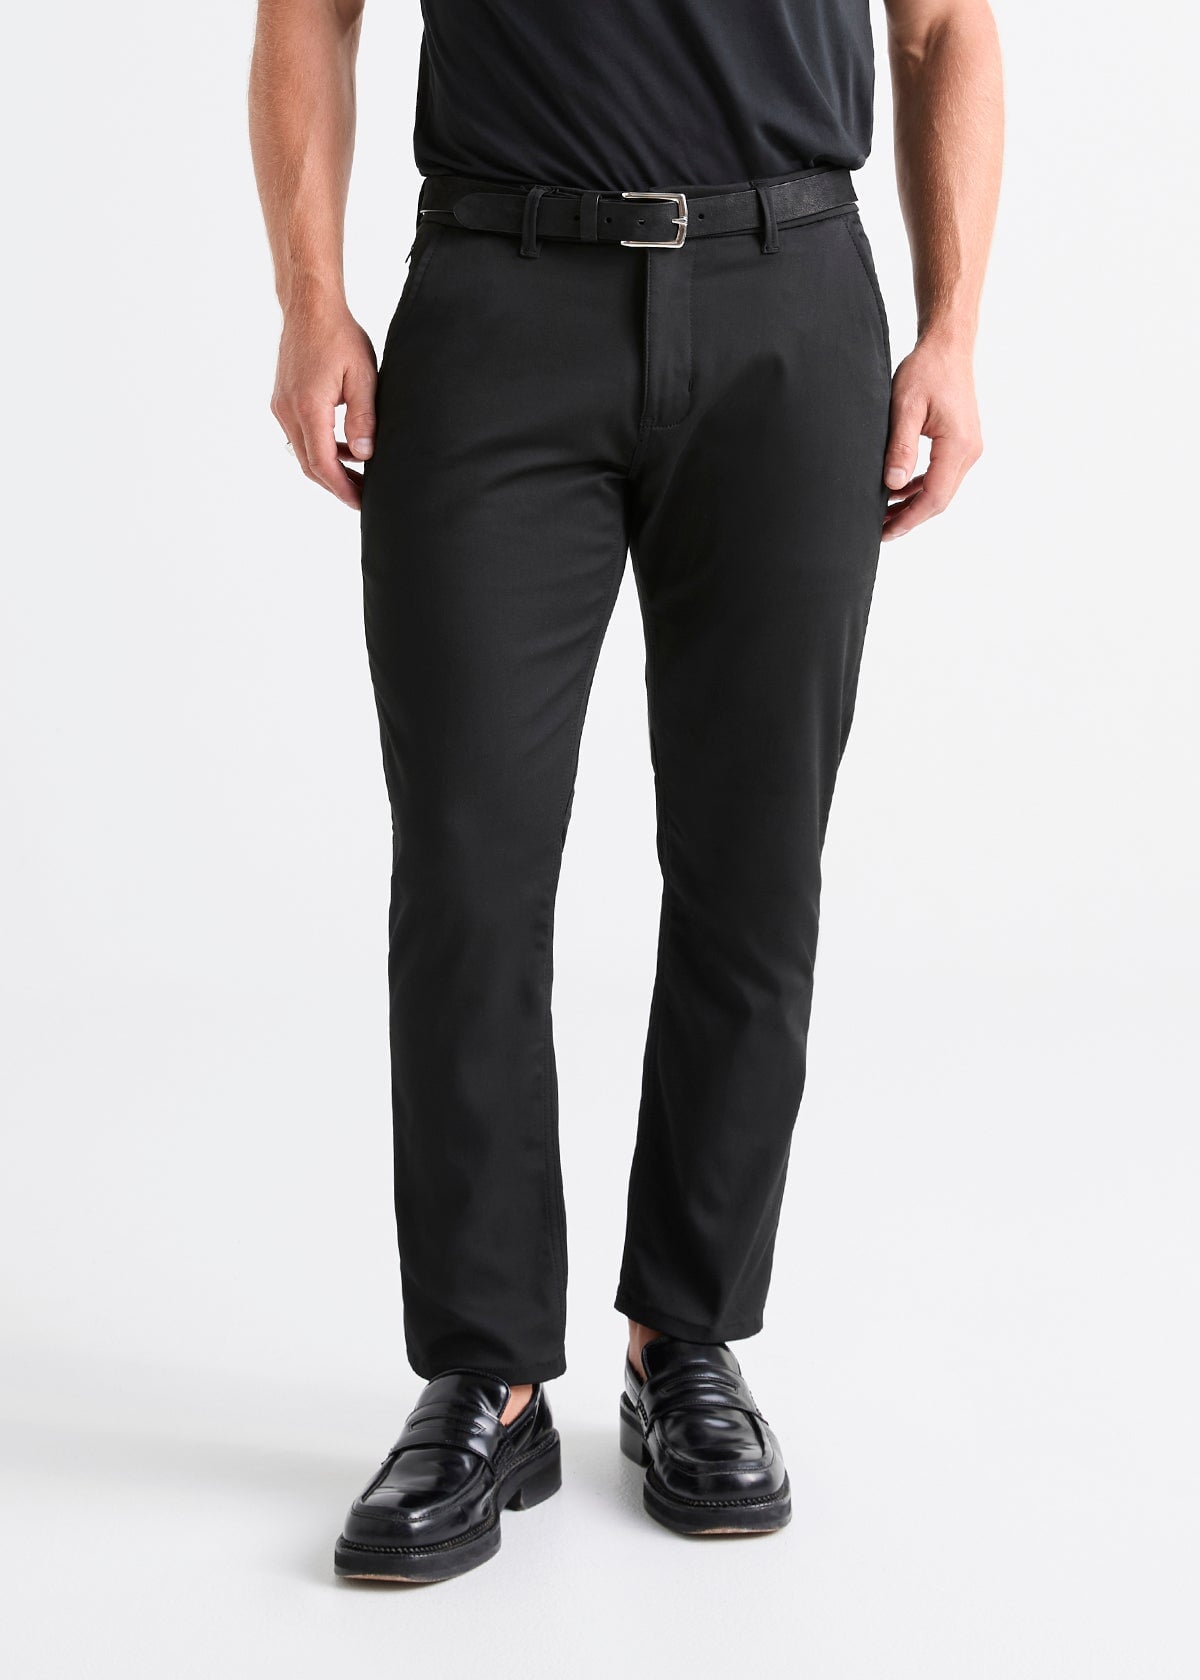 Men\'s Black Relaxed Fit Stretch Dress Pant